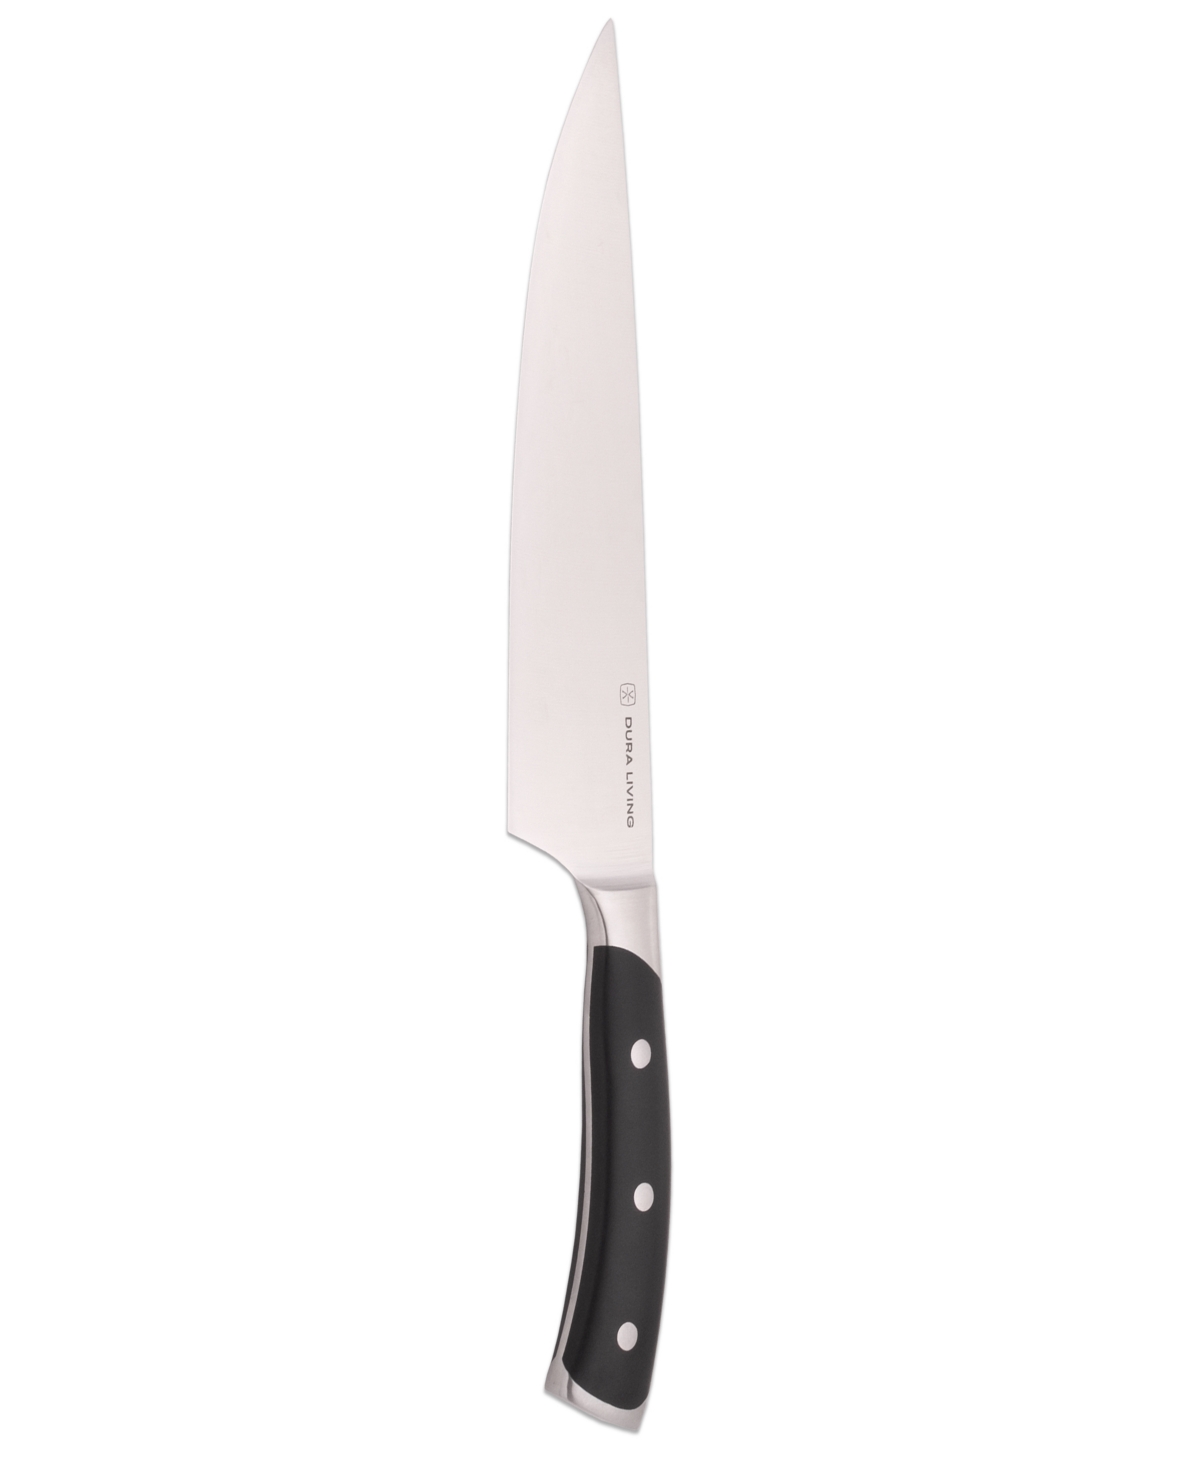 Duraliving 8" Professional Kitchen Chef Knife In Black